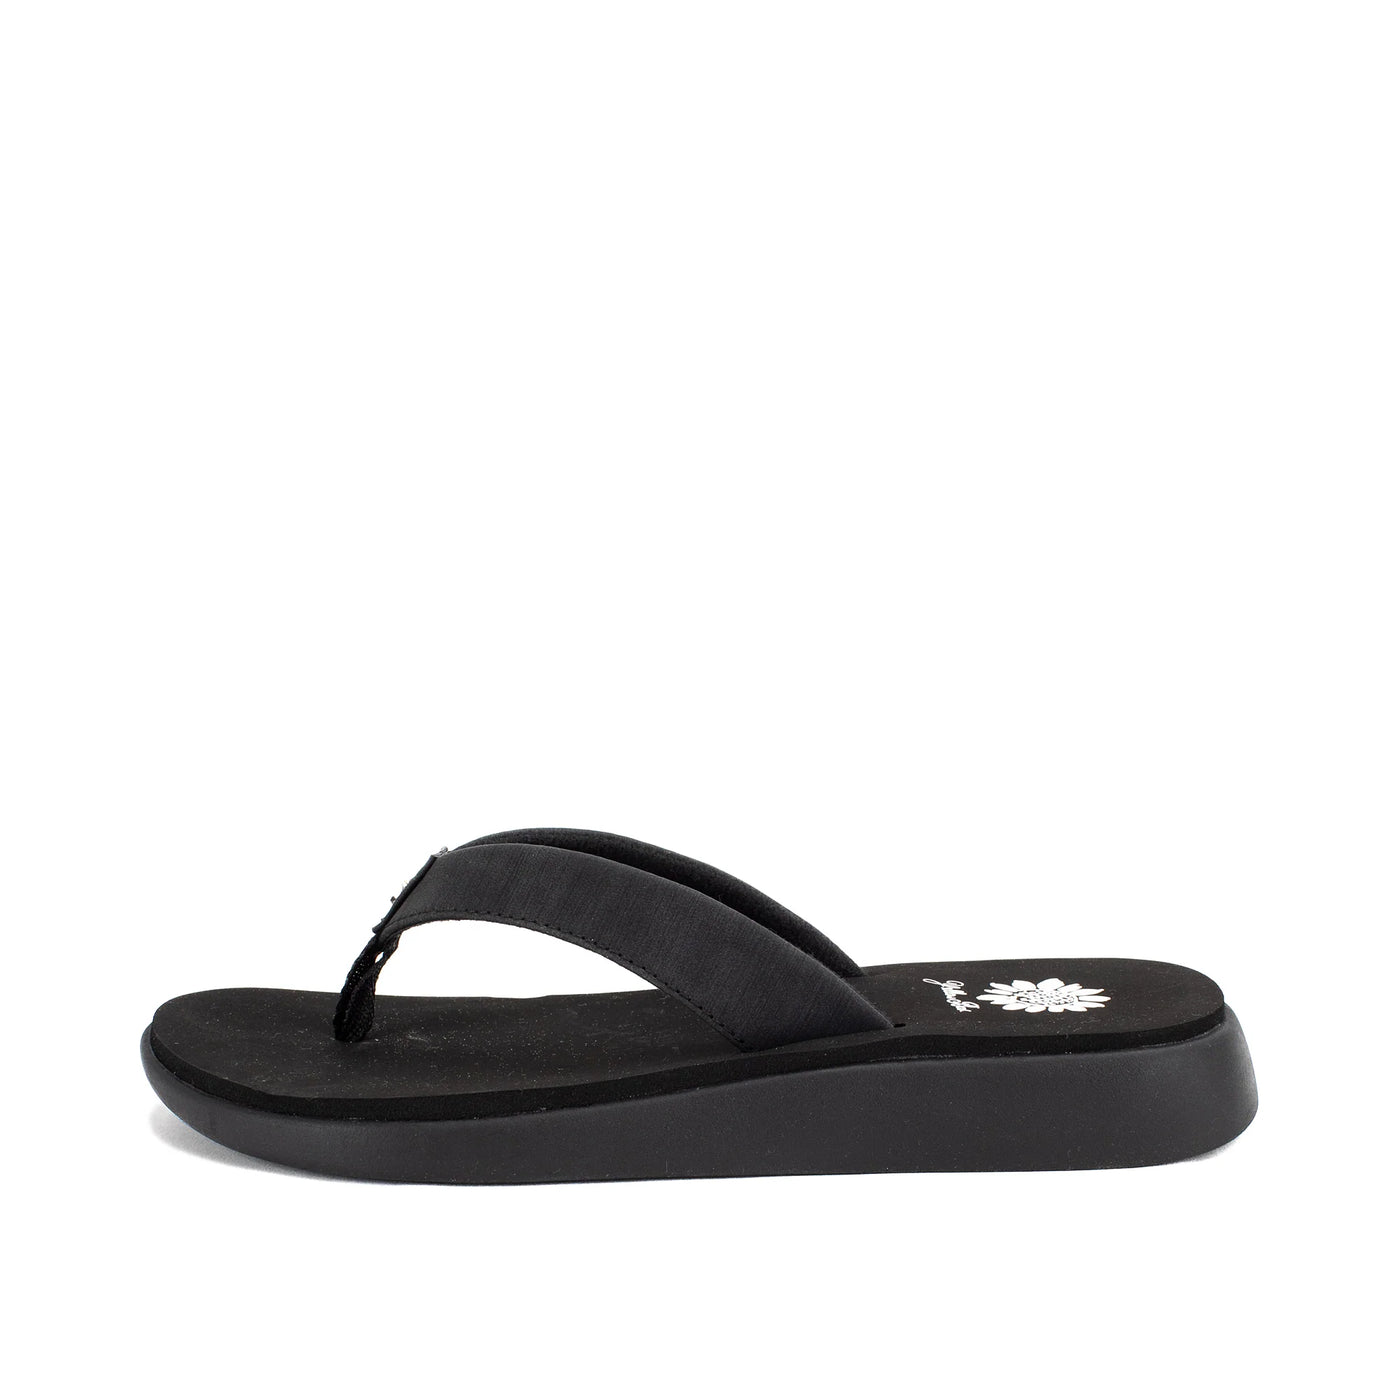 The Ginza Flip Flop